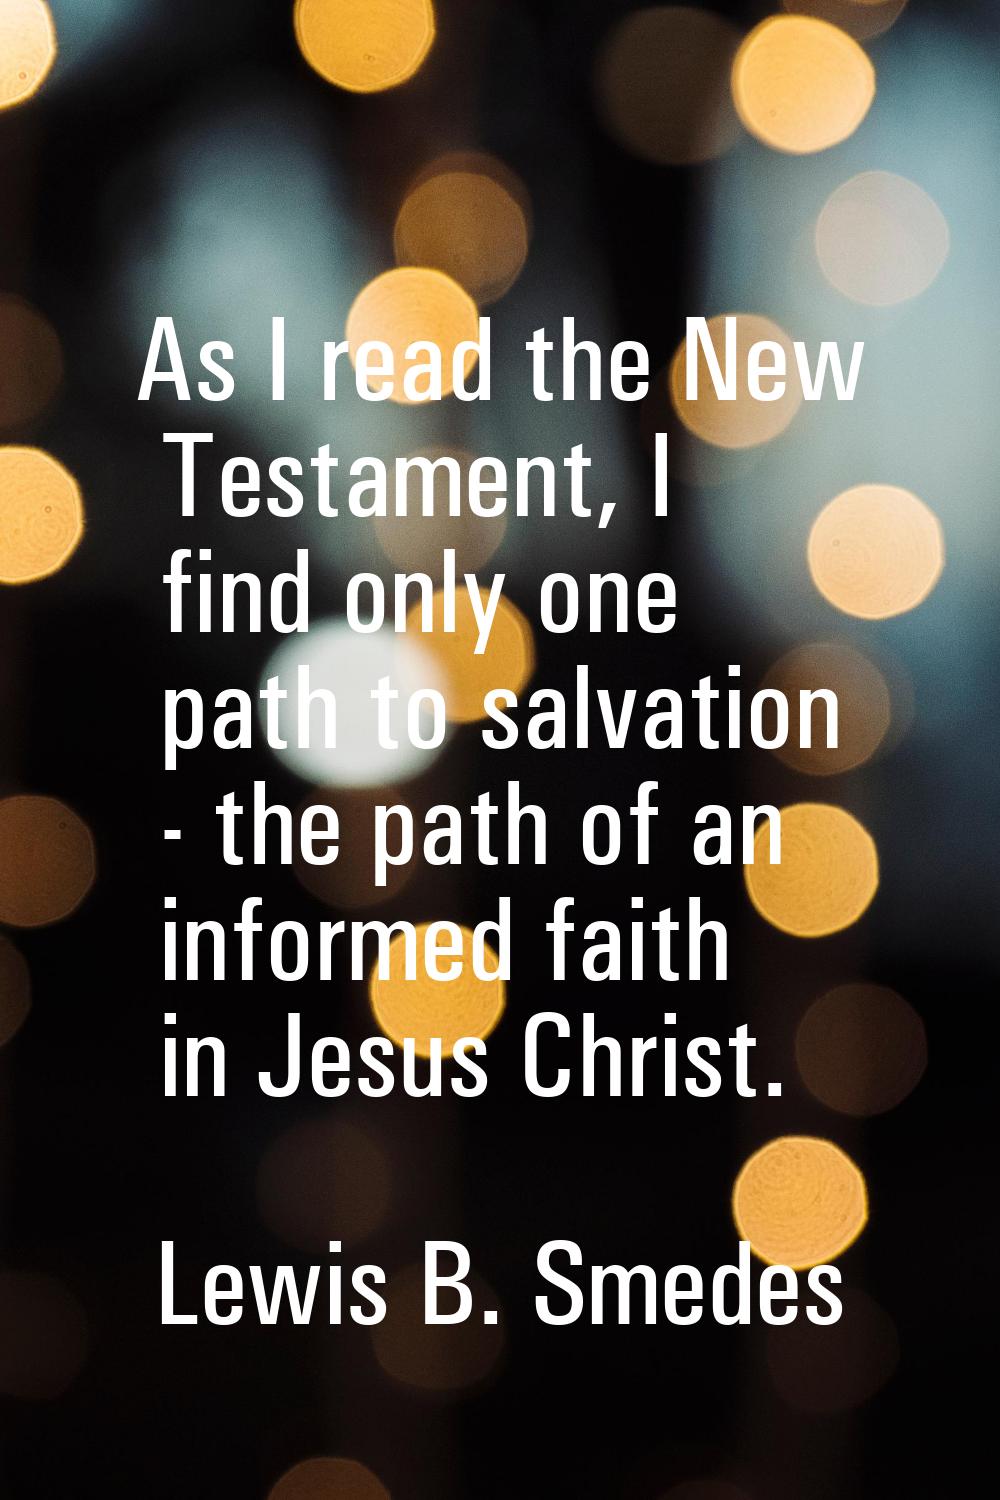 As I read the New Testament, I find only one path to salvation - the path of an informed faith in J